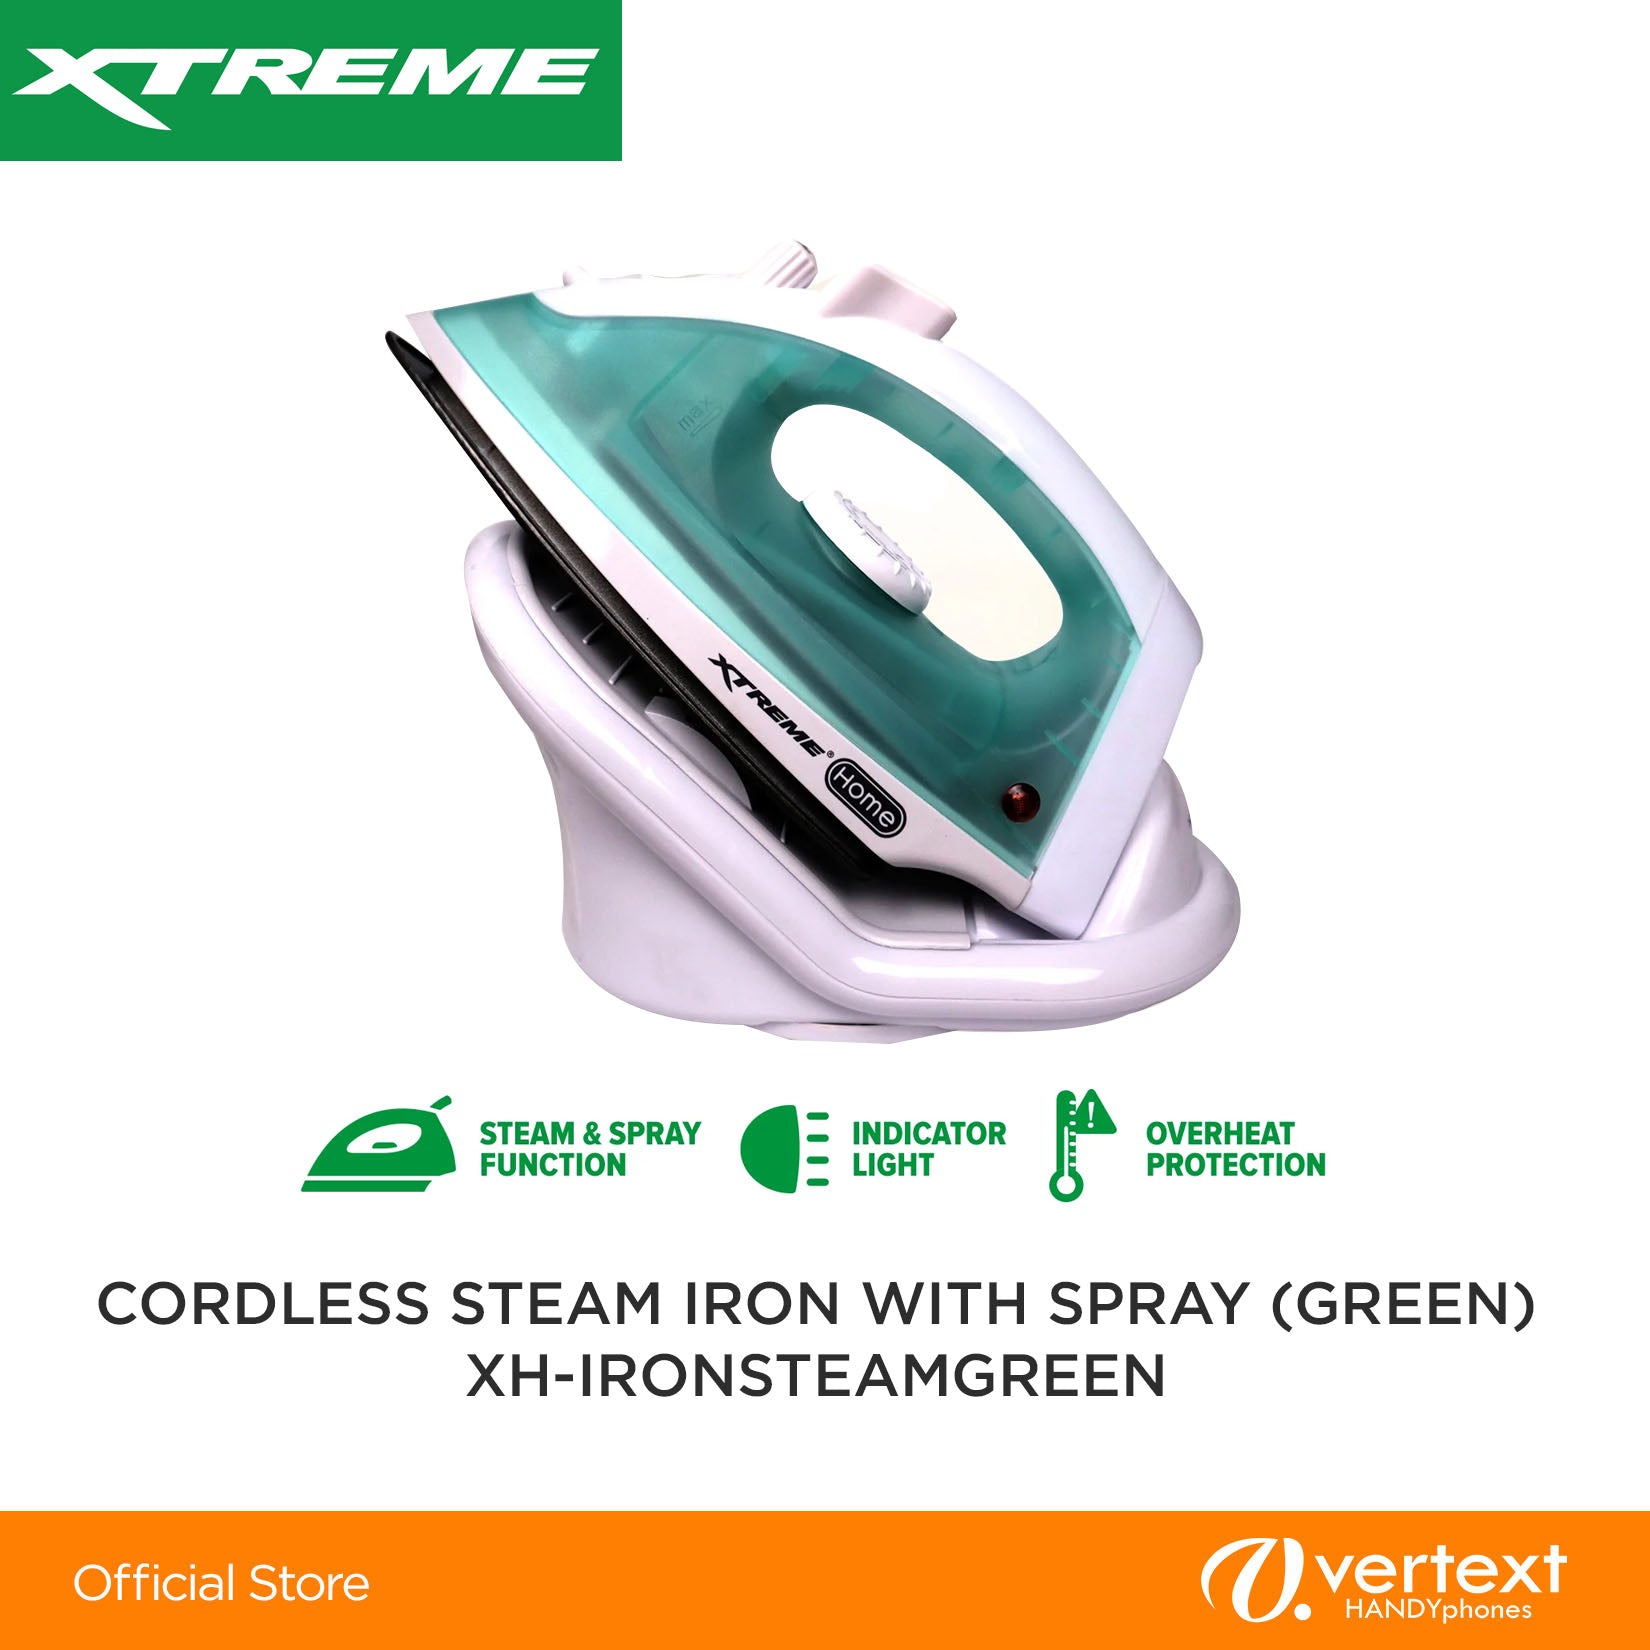 Xtreme XH-IRONSTEAMGREEN